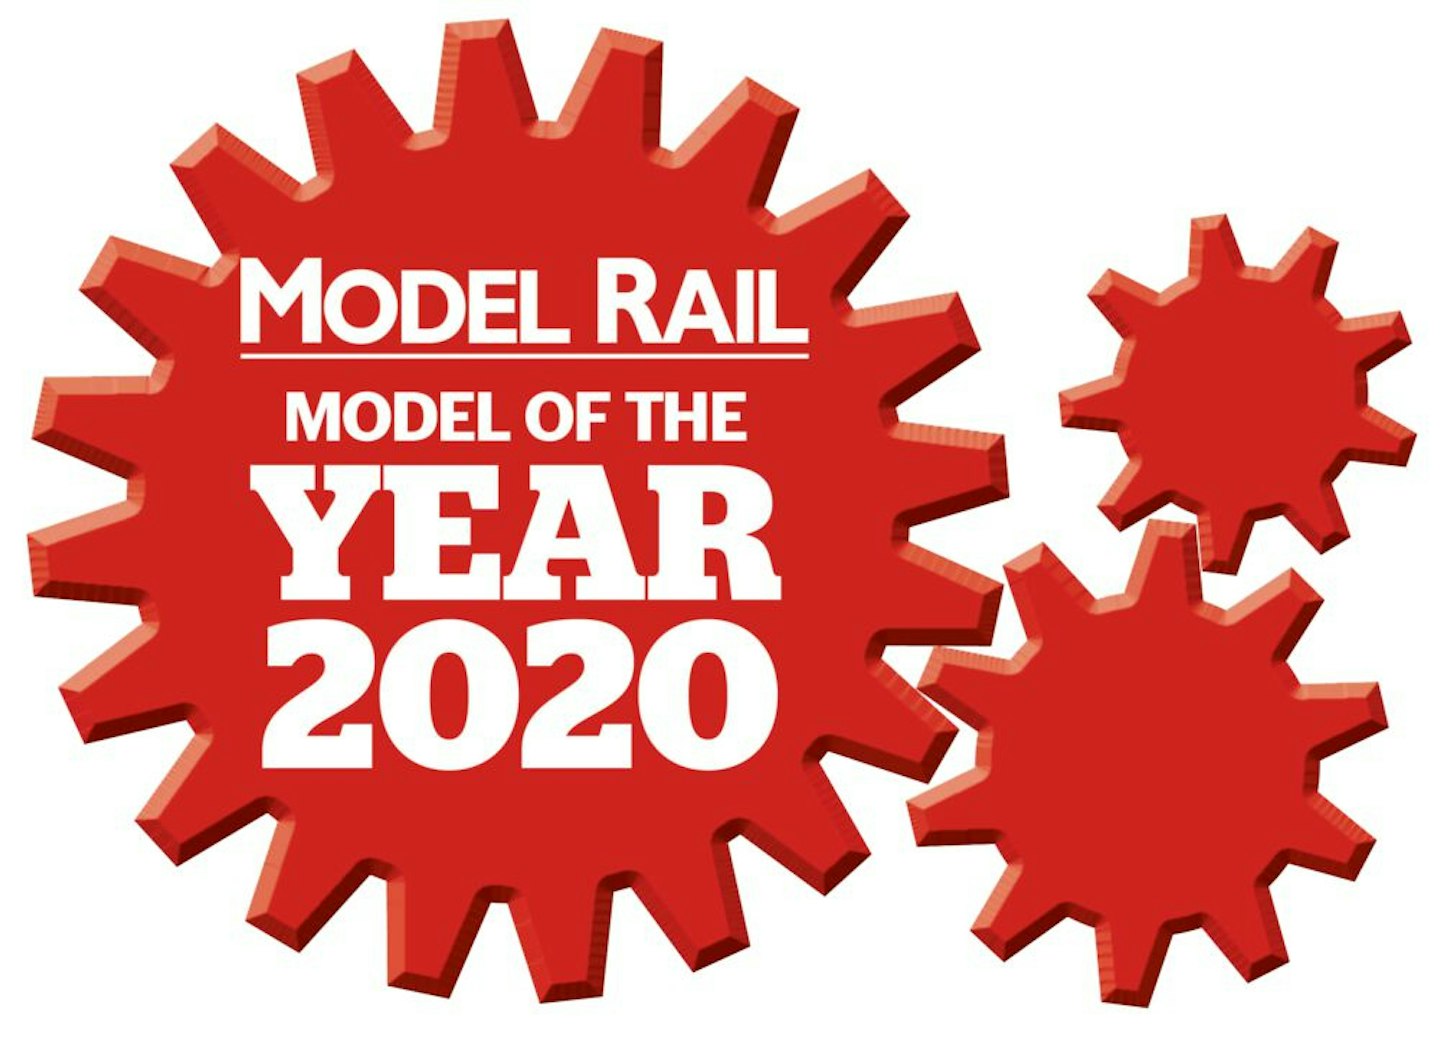 Model of the Year logo